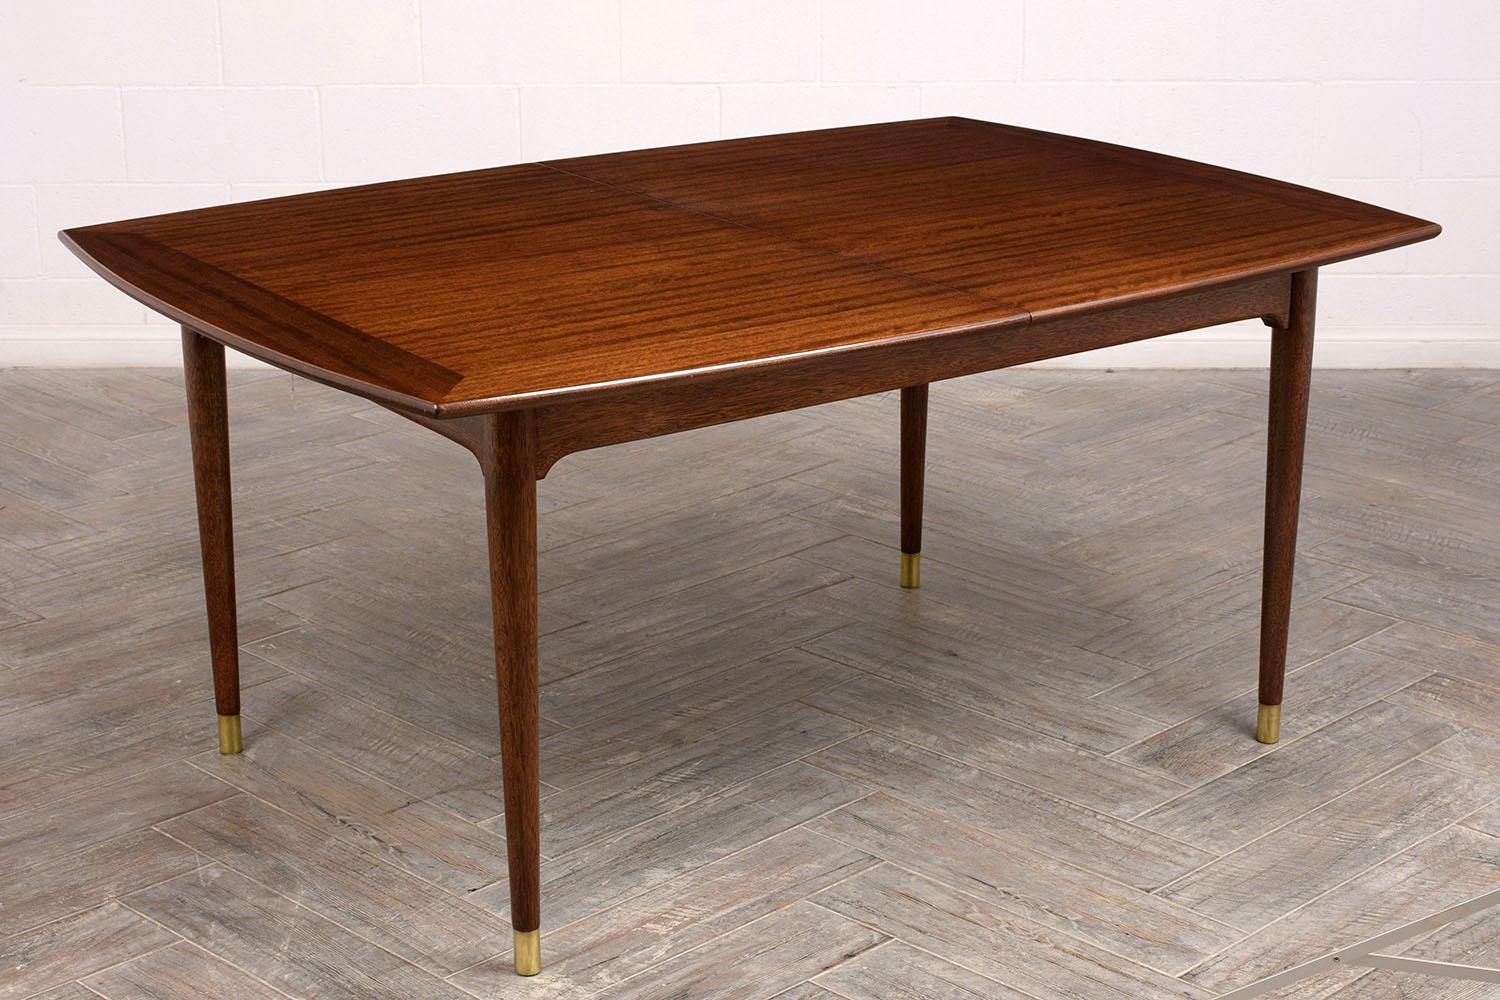 Stunning 1960s John Keal modern dining table for Brown Saltman California. Made from solid walnut wood, newly stained in a rich dark walnut color, with a lacquered finish. Finished with tapered legs and brass toe caps. The table comes with 2 -